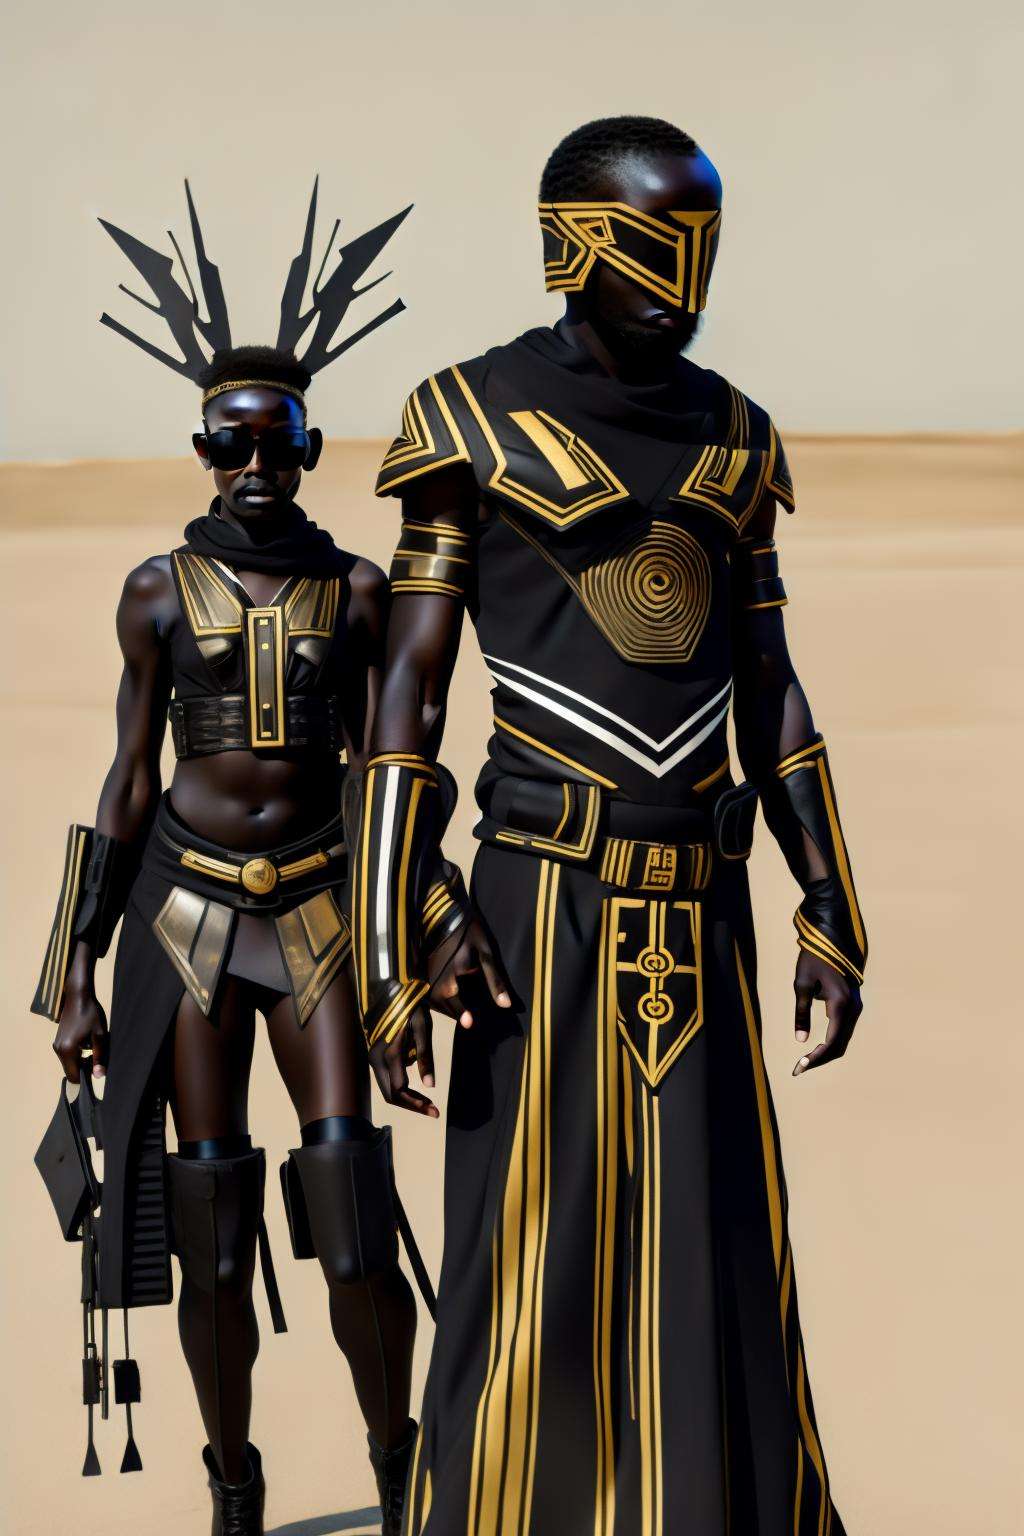 cyber_africa, photo of  two people in costumes, Adam Saks, cyberpunk, concept art, antipodeans